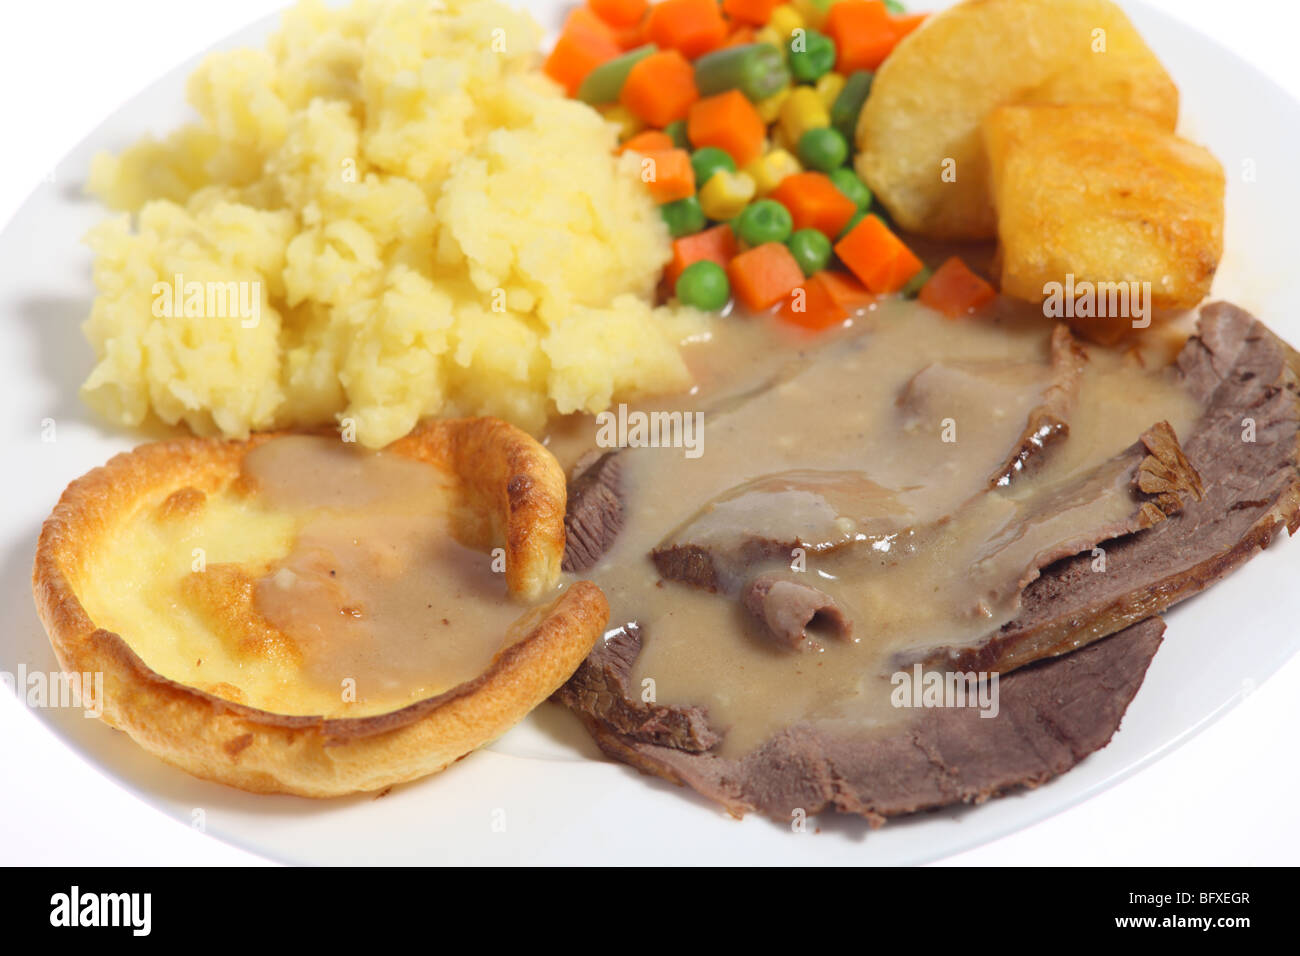 Close-up on a plate of roast beef, yorkshire pudding (or popover), diced vegetables and potato. Stock Photo